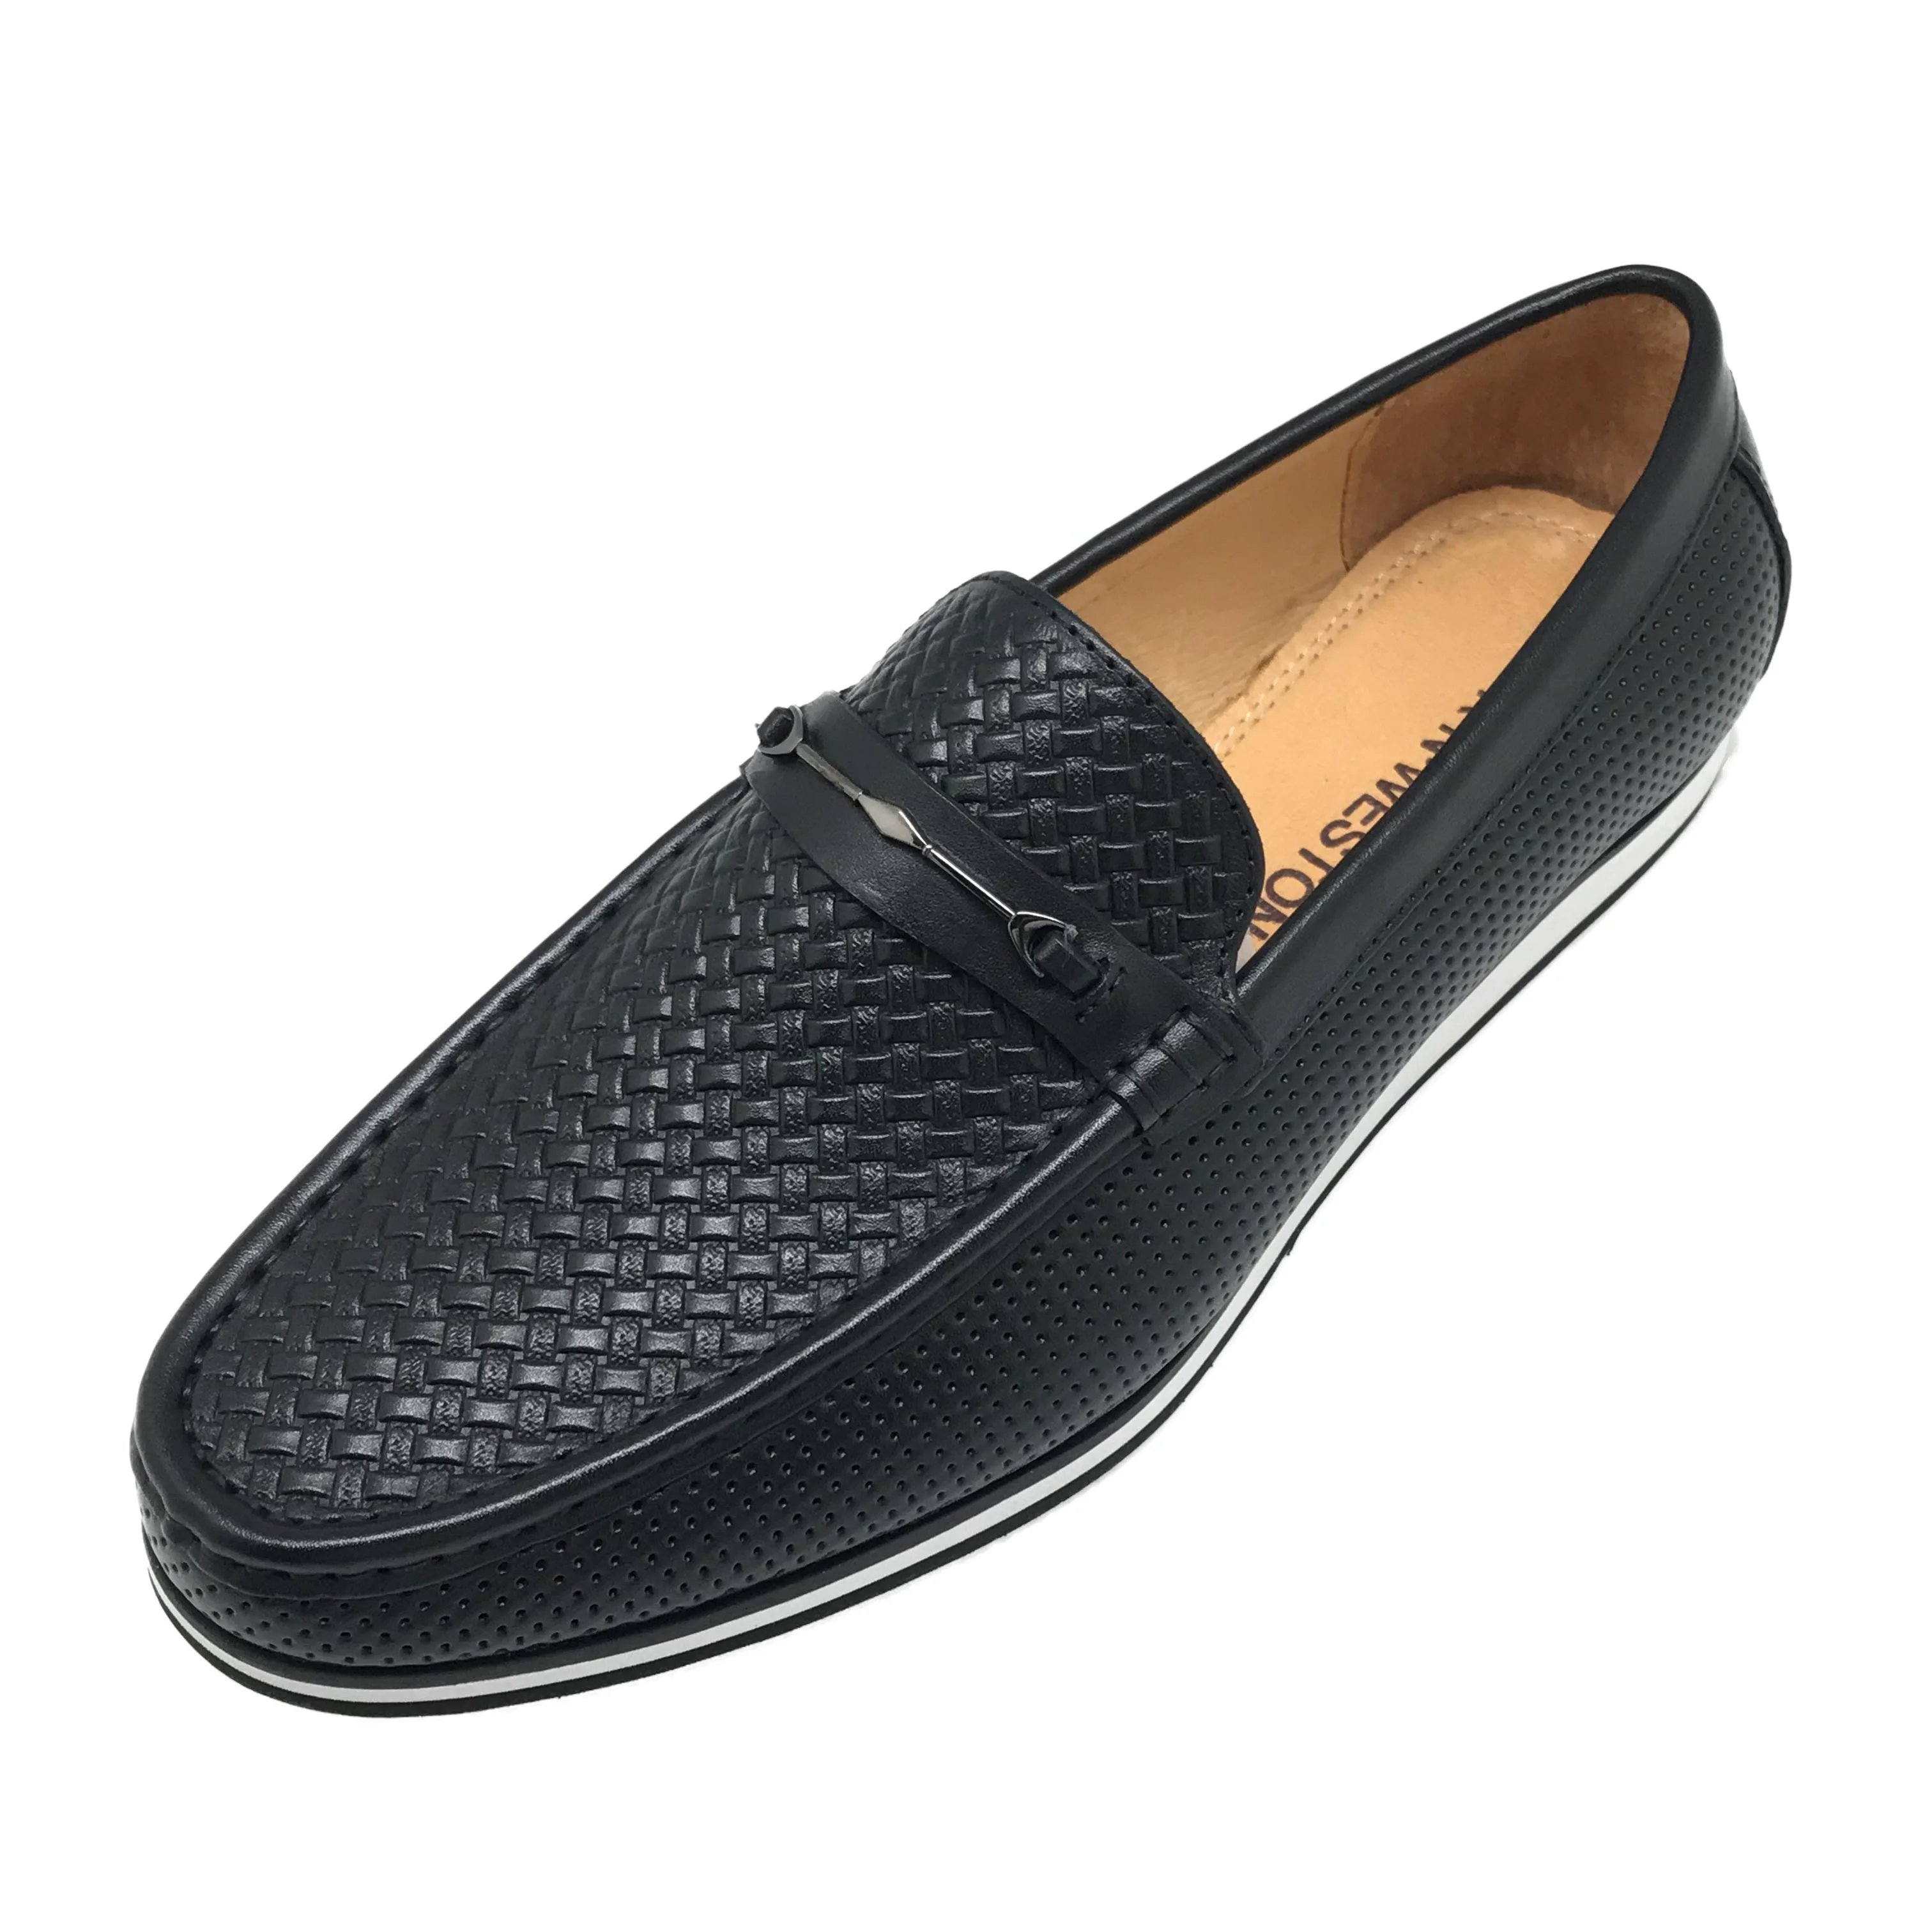 Fashion Men Drive Loafers Wholesale 2021 New Fashion Casual Slip On Shoe  For Barber - Buy Men Loafers Shoes,Leather Loafers,Casual Loafers Product  on Alibaba.com